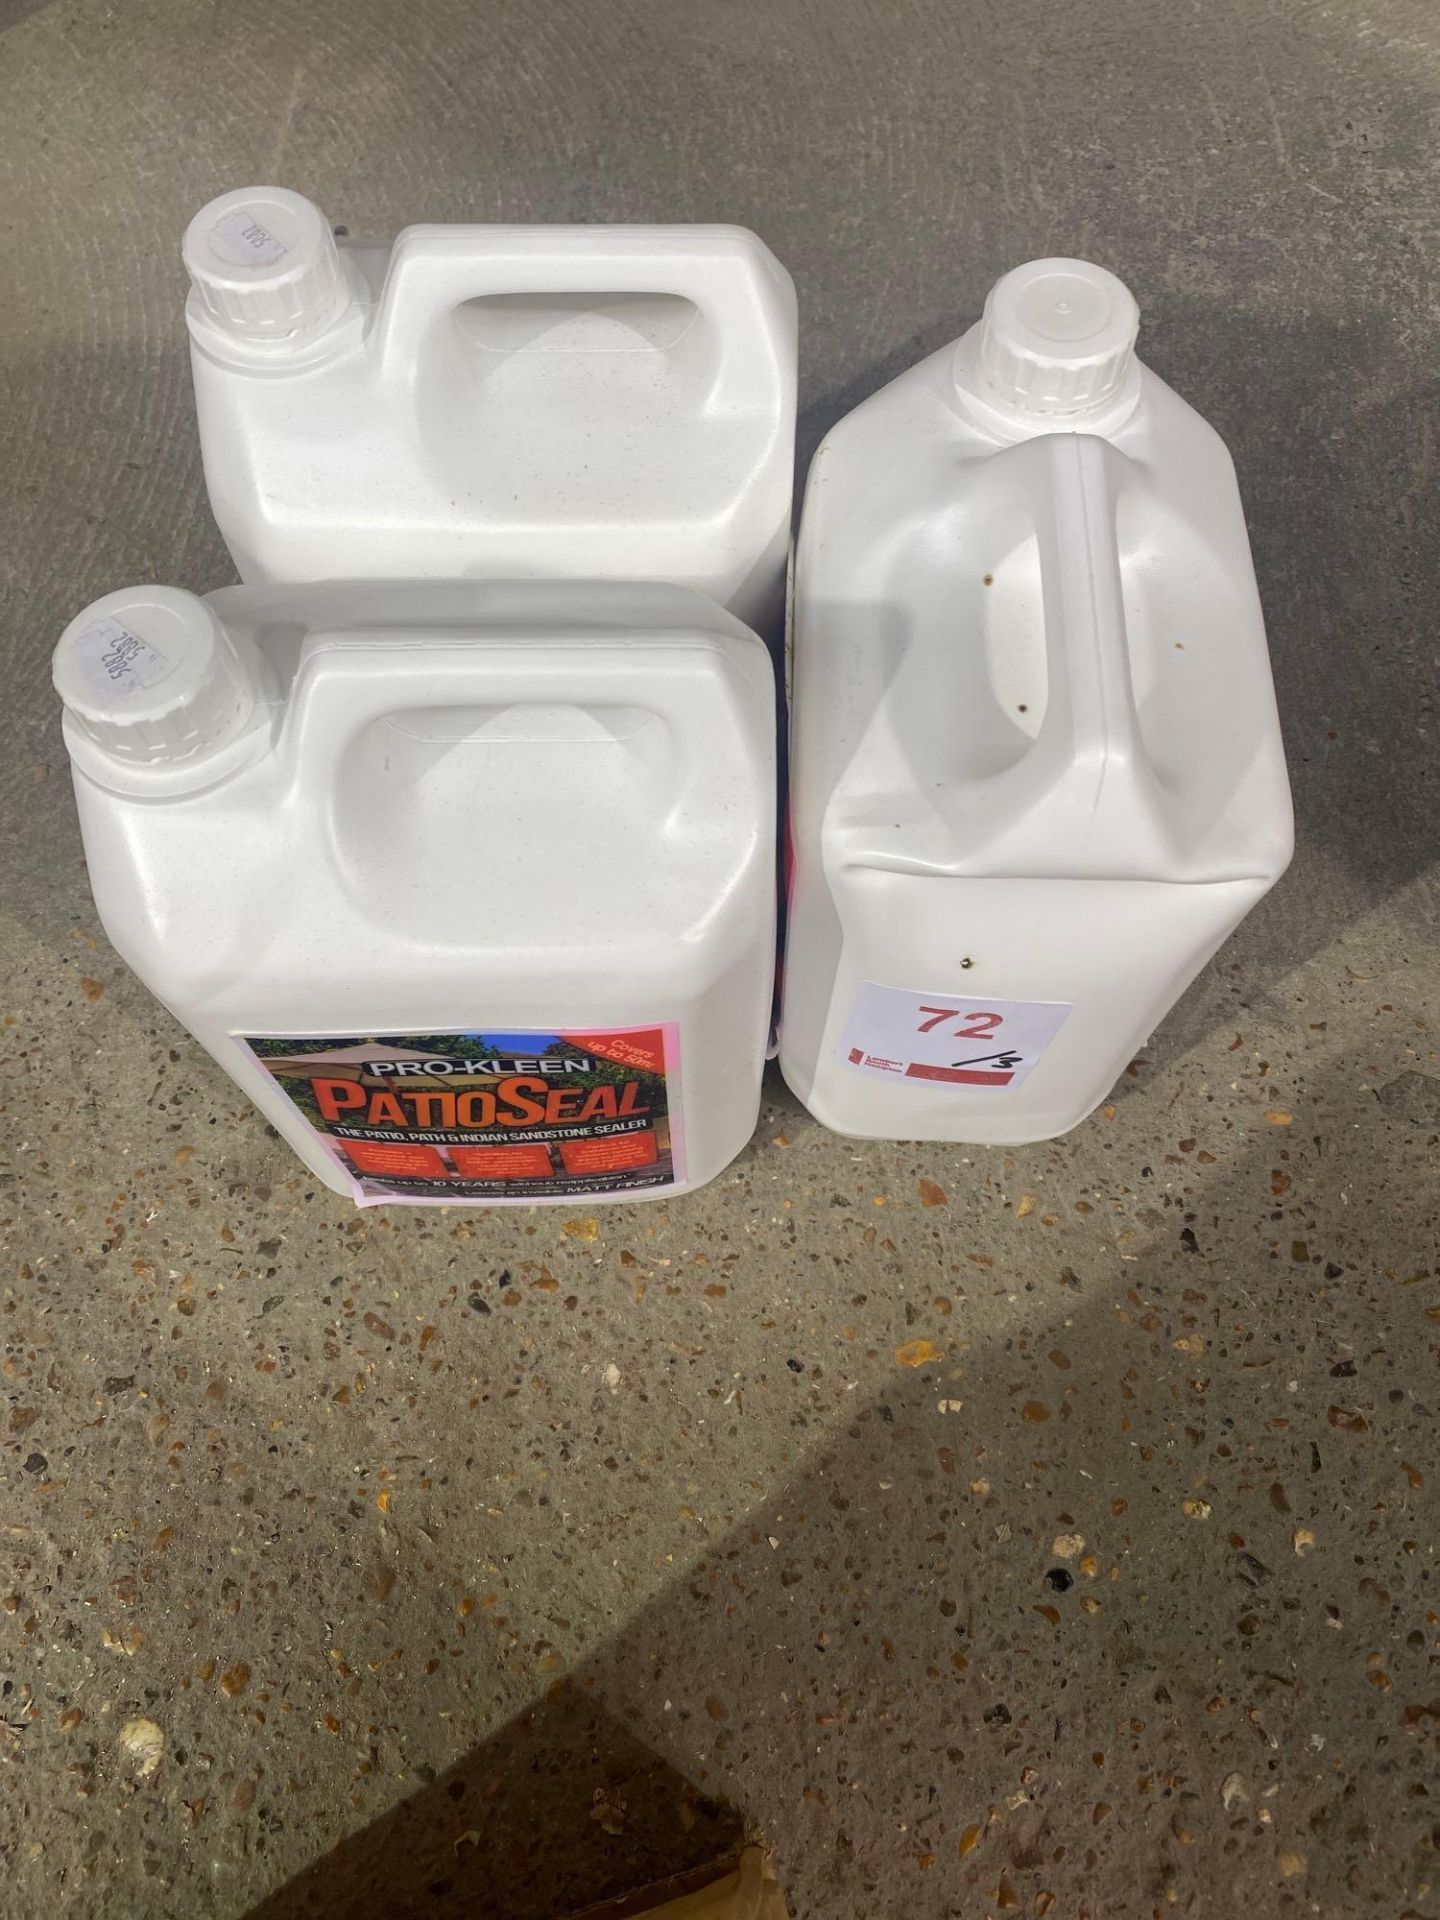 3 x 5L Pro clean patio seal - Image 2 of 2